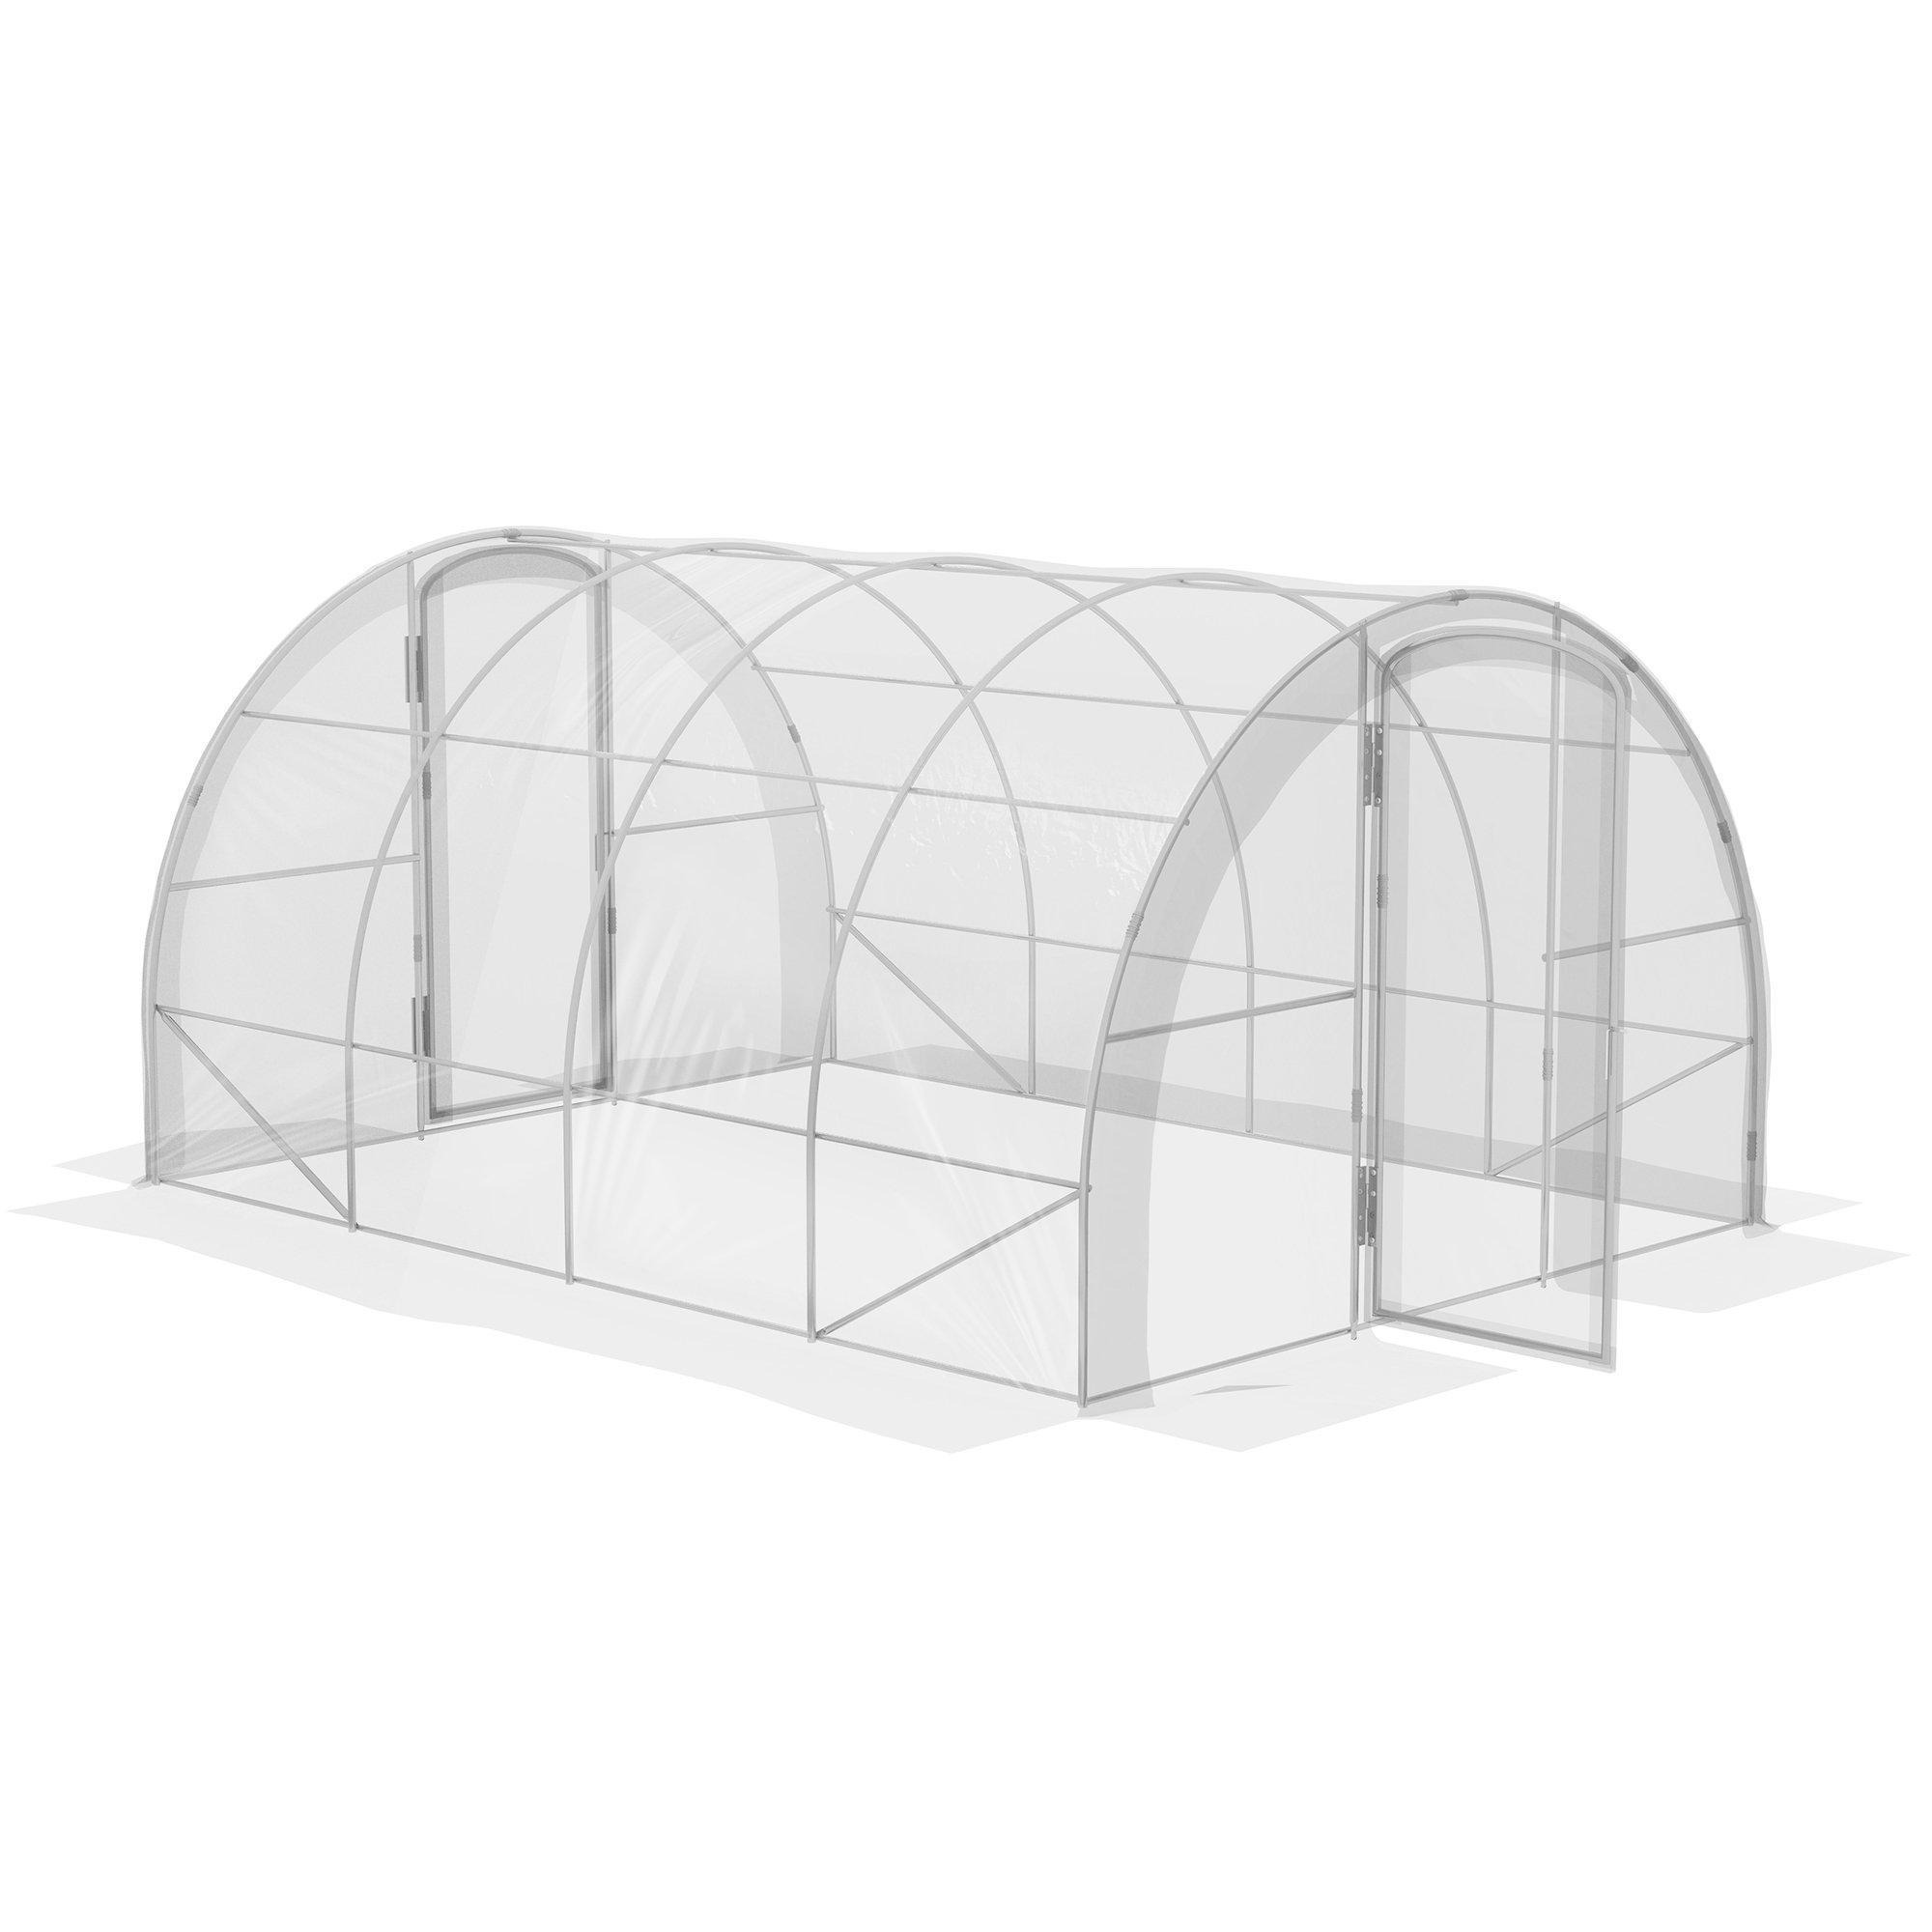 Polytunnel Greenhouse with PE Cover, Walk-in Grow House - image 1